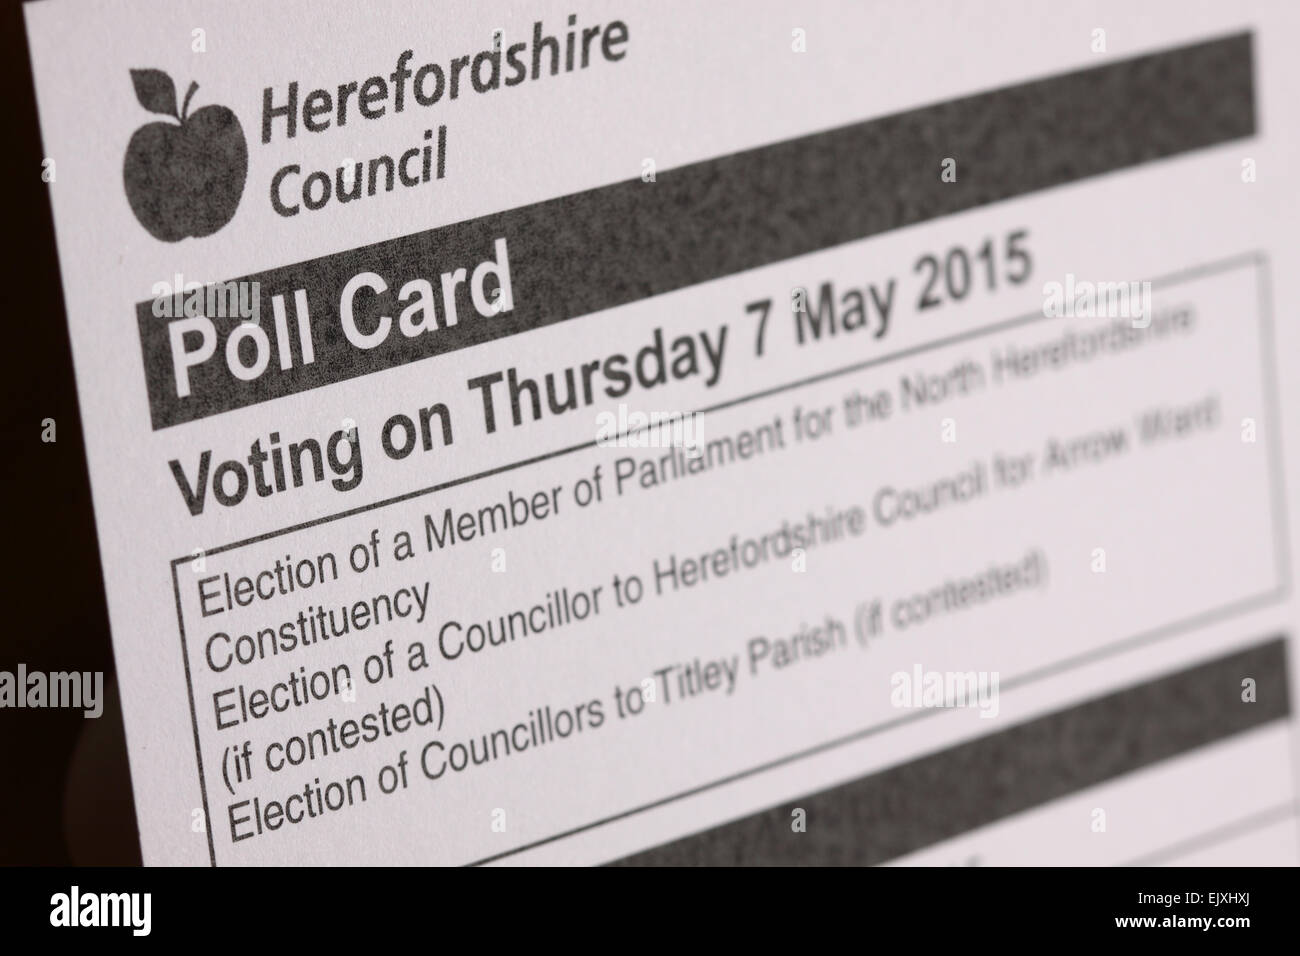 April 2015. Herefordshire Council have started to deliver voting Poll Cards to voters in the county ready for the Elections on 7th May 2015. Registered voters will be able to vote for their local Member of Parliament ( MP ) in the national General Election, local county councillor and also local parish councillor. Stock Photo